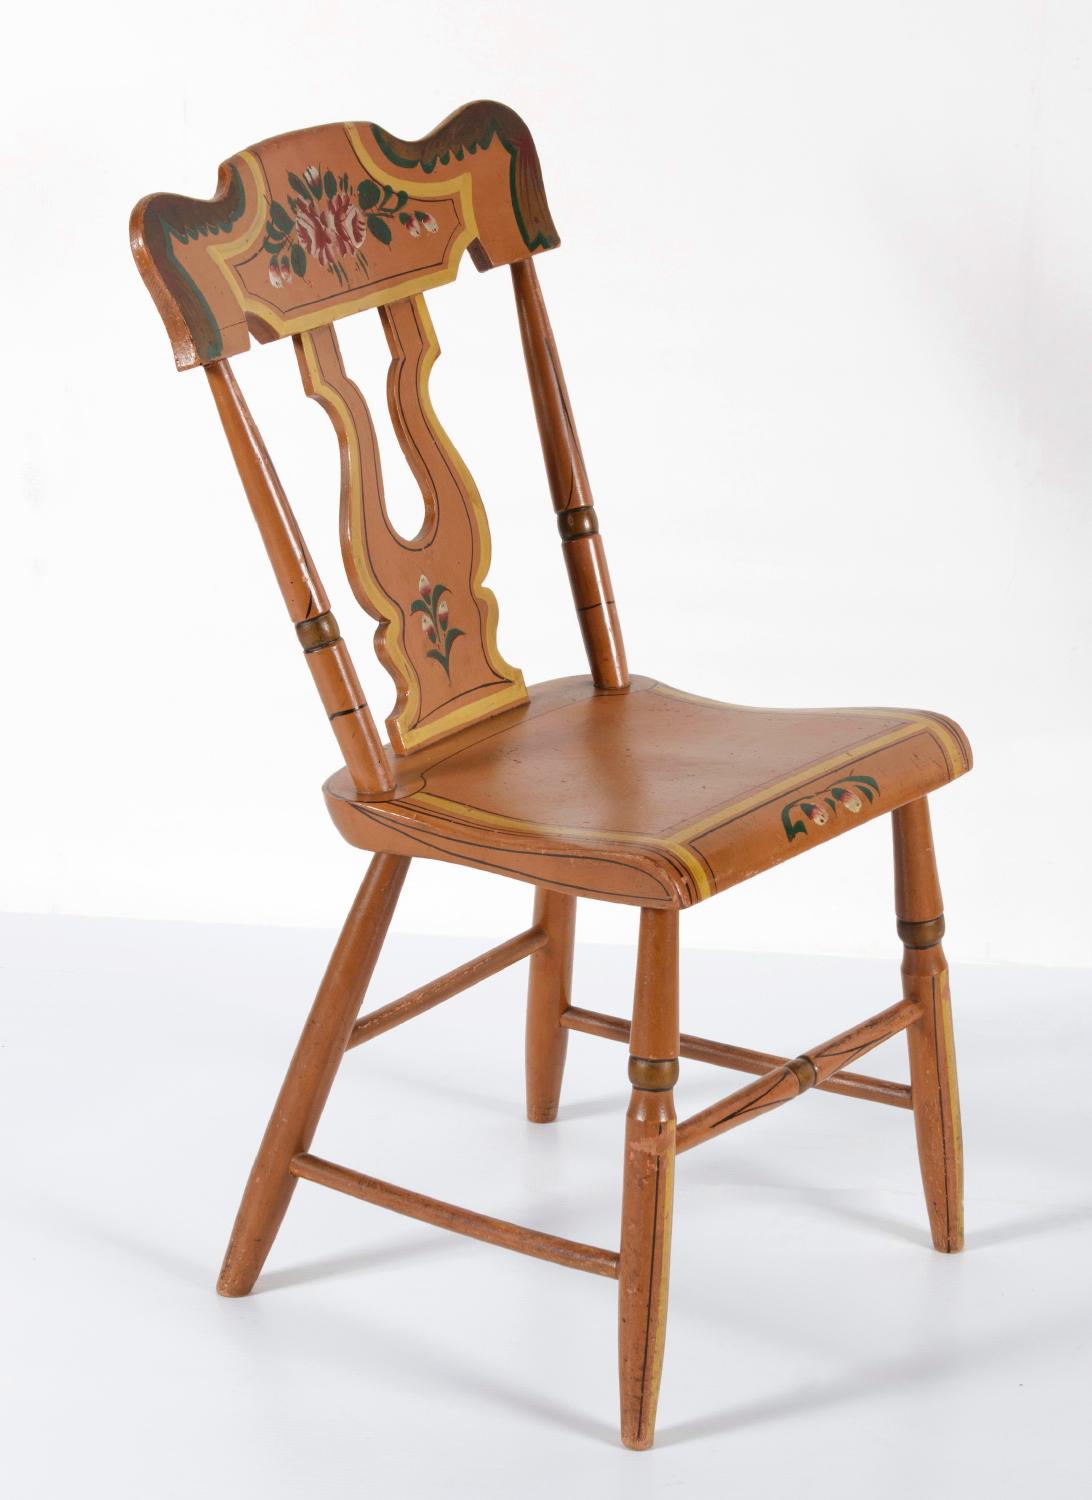 SET OF 6 SALMON PAINTED, PLANK-SEAT, LYRE BACK, PENNSYLVANIA CHAIRS WITH YELLOW STRIPING AND ROSE DECORATION, CA 1845-1865:

Set of 6 paint-decorated, Pennsylvania, plank-seated chairs of the mid-19th century (1845-65), with lyre or bootjack-style